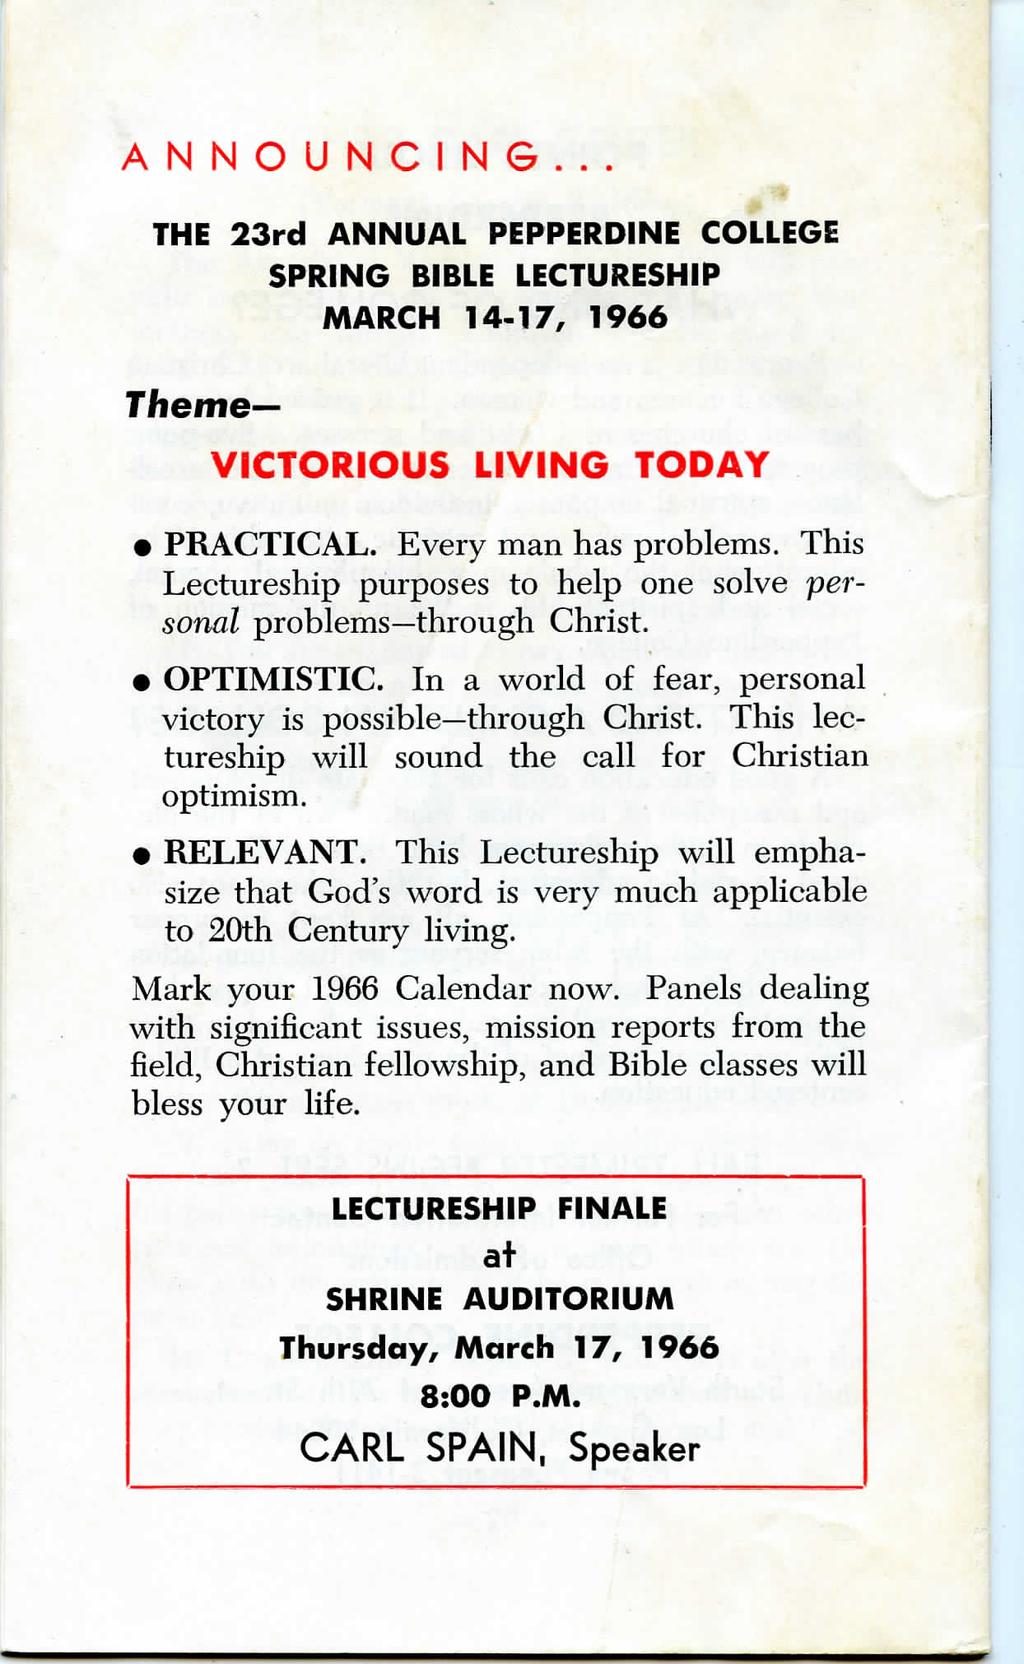 ANNOUNCING... THE 23rd ANNUAL PEPPERDINE COLLEGE SPRING BIBLE LECTURESHIP MARCH 14-17, 1966 Theme VICTORIOUS LIVING TODAY PRACTICAL. Every man has problems.